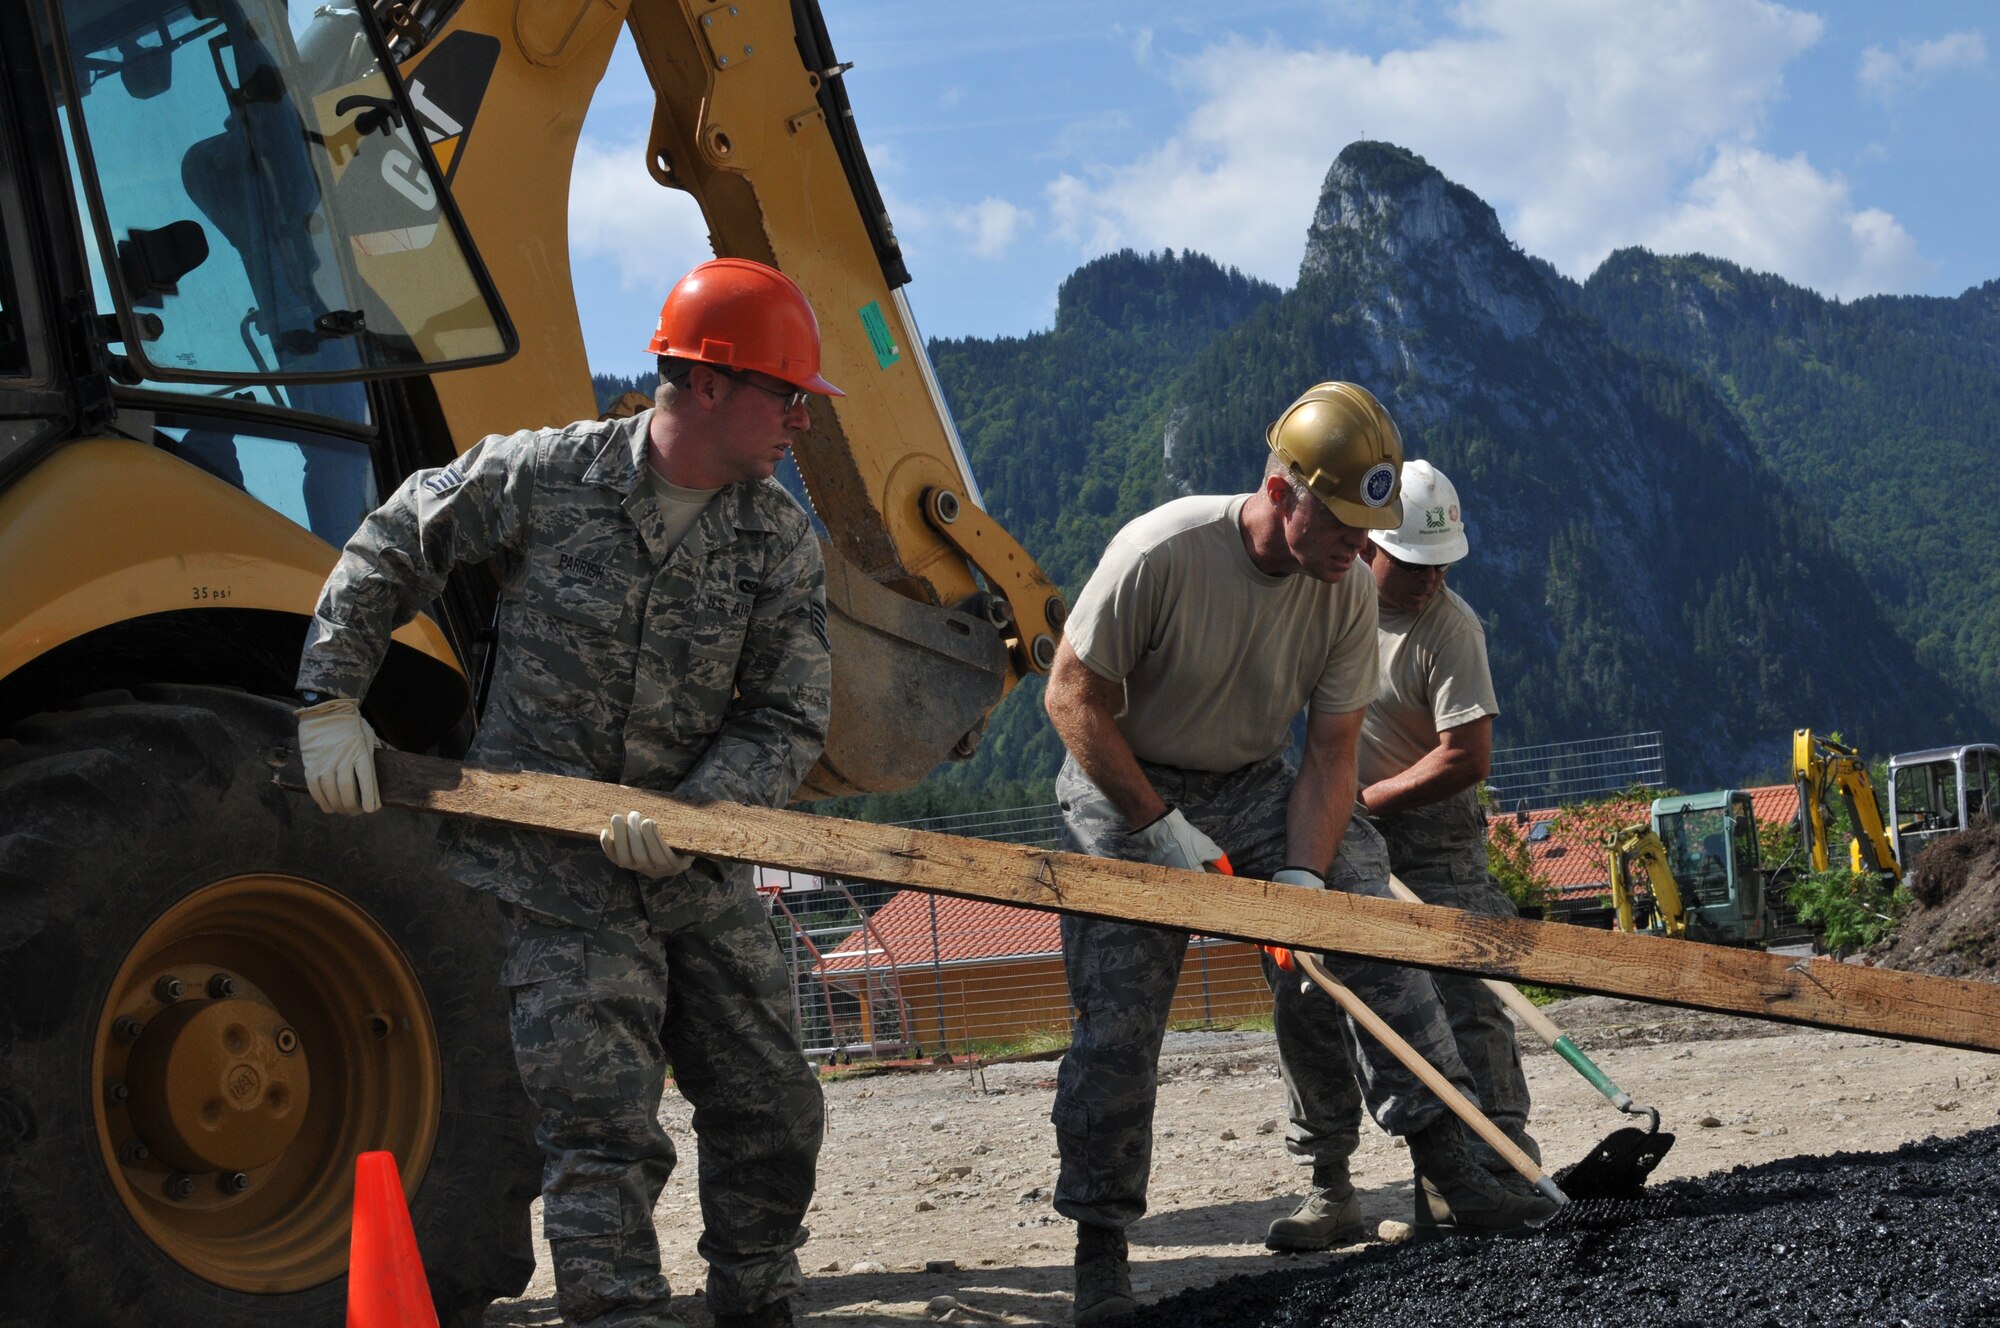 Members of the Wyoming Air National Guard's 153rd Civil Engineer Squadron Staff Sgt. Robert Parrish, Chief Master Sgt. Emery Edwards and Master Sgt. Andy Salyards smooth asphalt Aug. 13, 2012, at the NATO School recreation center, Oberammergau, Germany. Airmen from the 153rd CES are putting their skills to work as they conduct their annual training. (U.S. Air Force photo by Staff Sgt. Natalie Stanley)